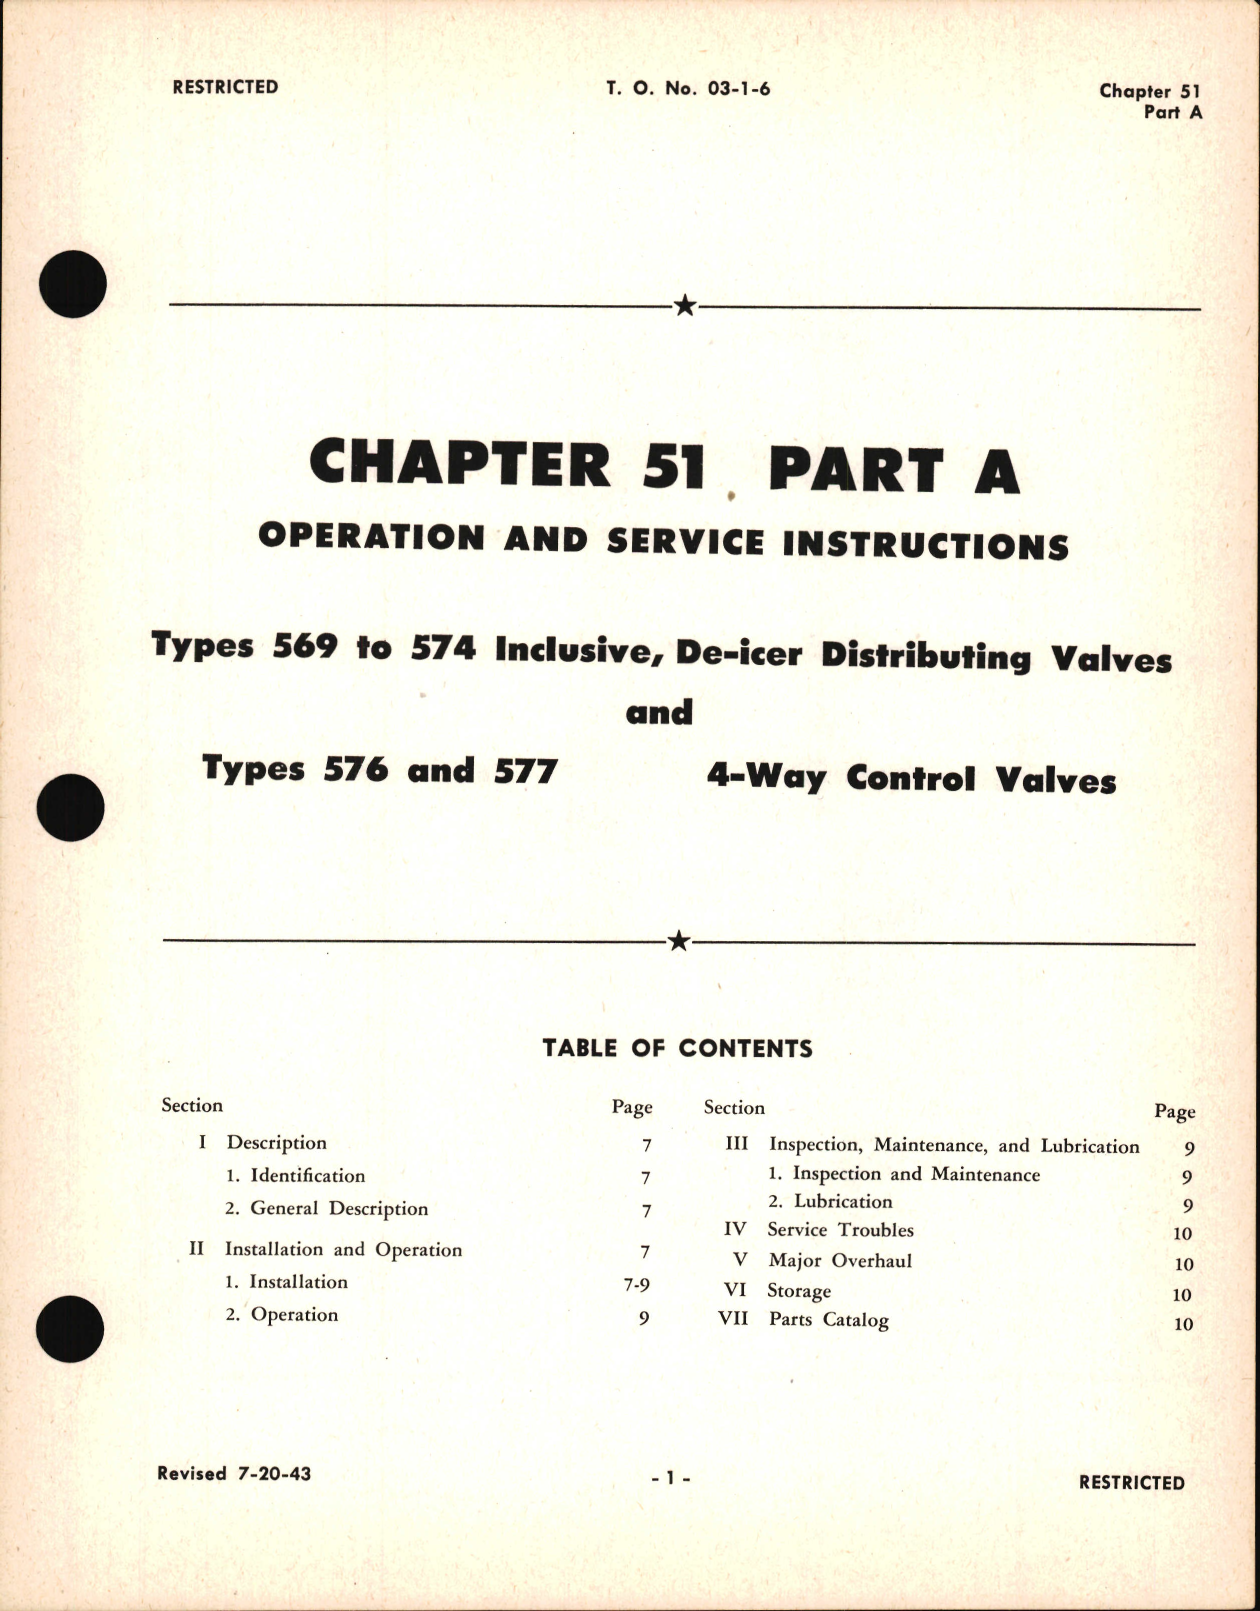 Sample page 1 from AirCorps Library document: Operation & Service Instructions for De-Icer Distributing Valves and 4-Way Control Valves, Ch 51 Part A